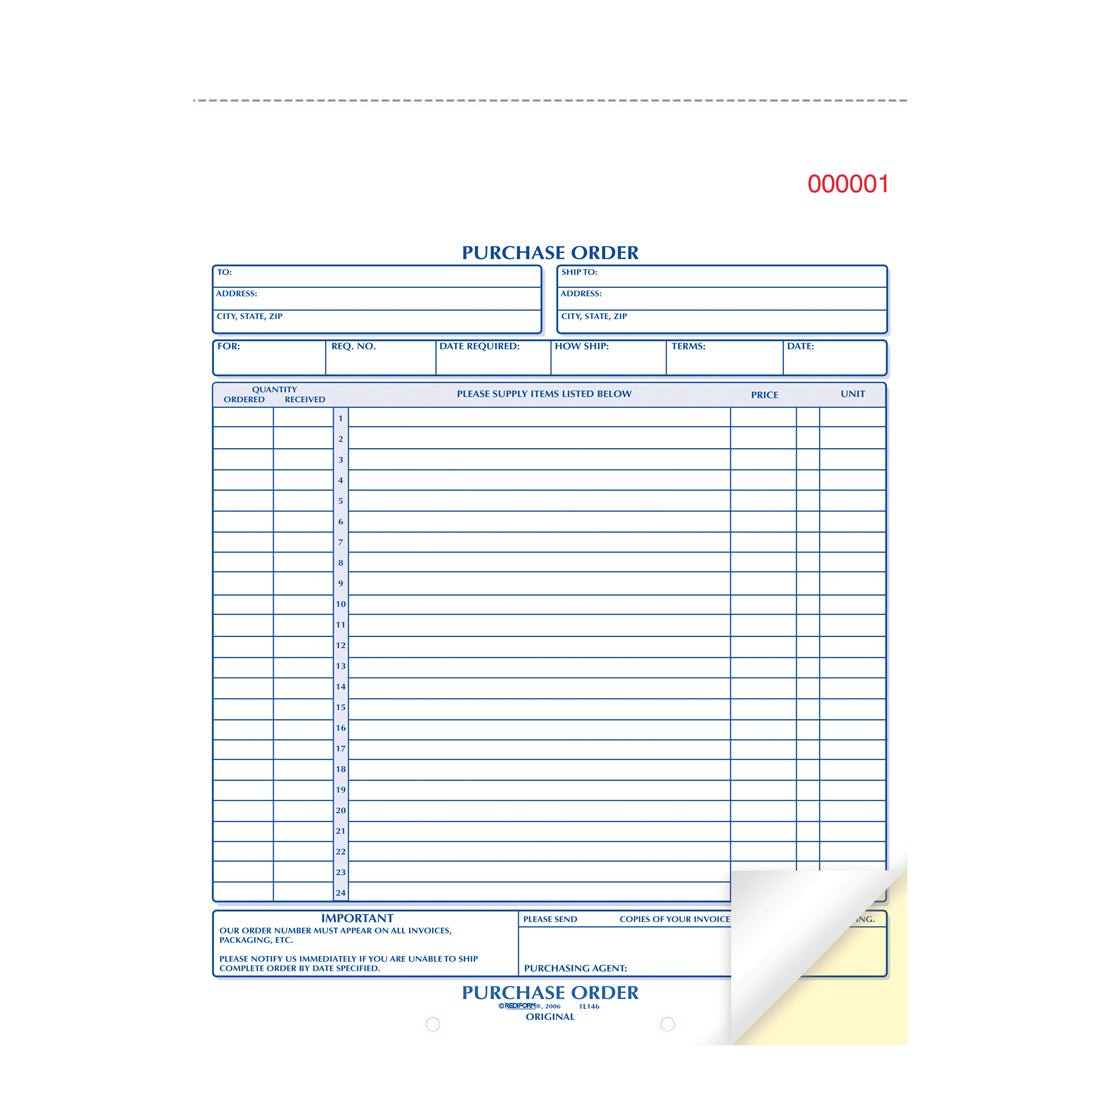 Purchase Order Book 1L146